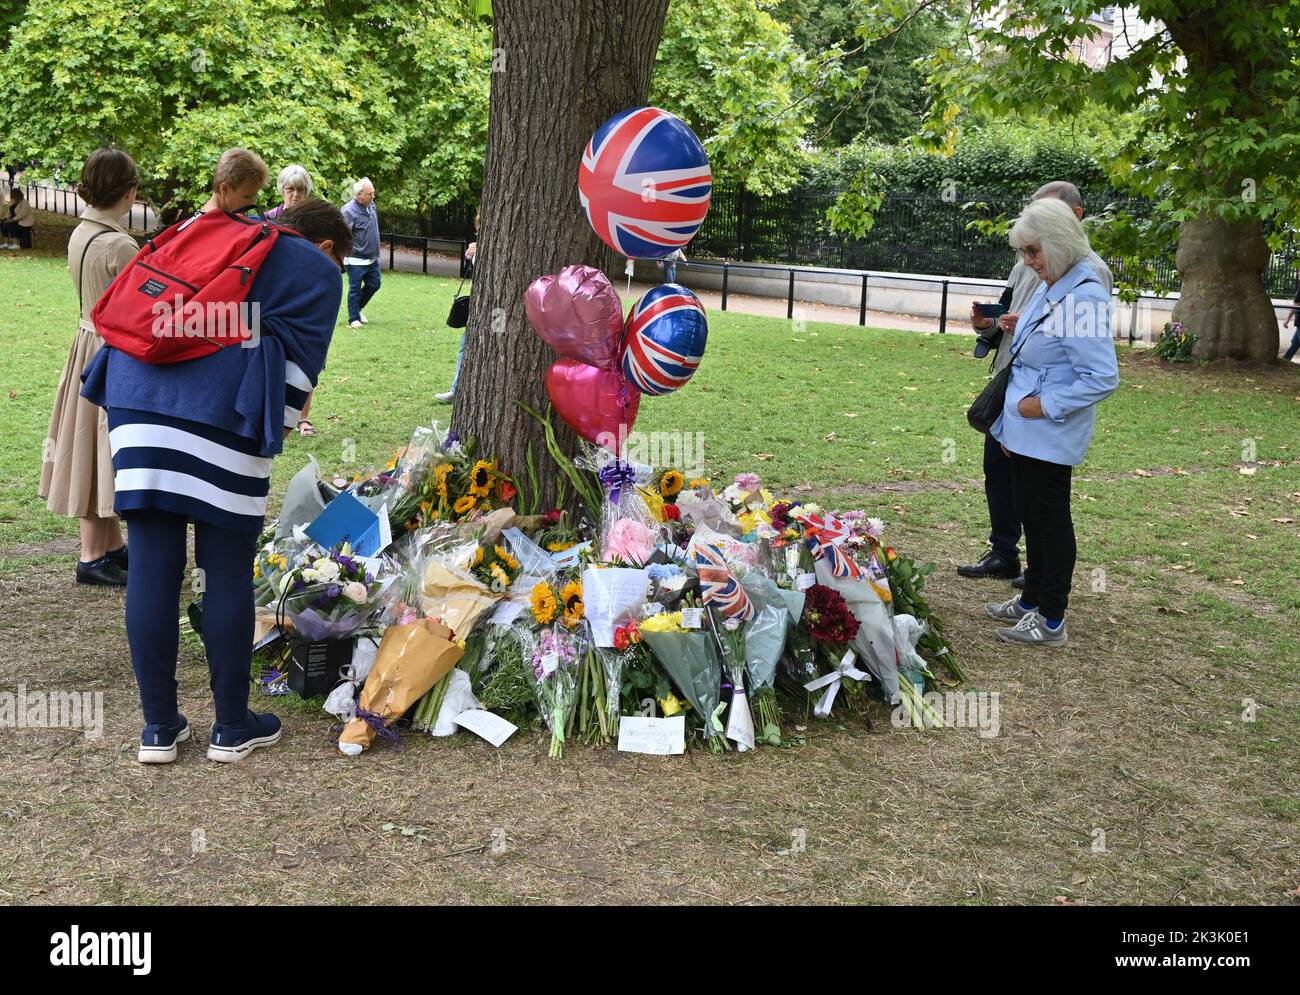 Following the death of HM Queen Elizabeth II on 8 September 2022 many people laid floral tributes. These examples were laid in Green Park, London. Stock Photo